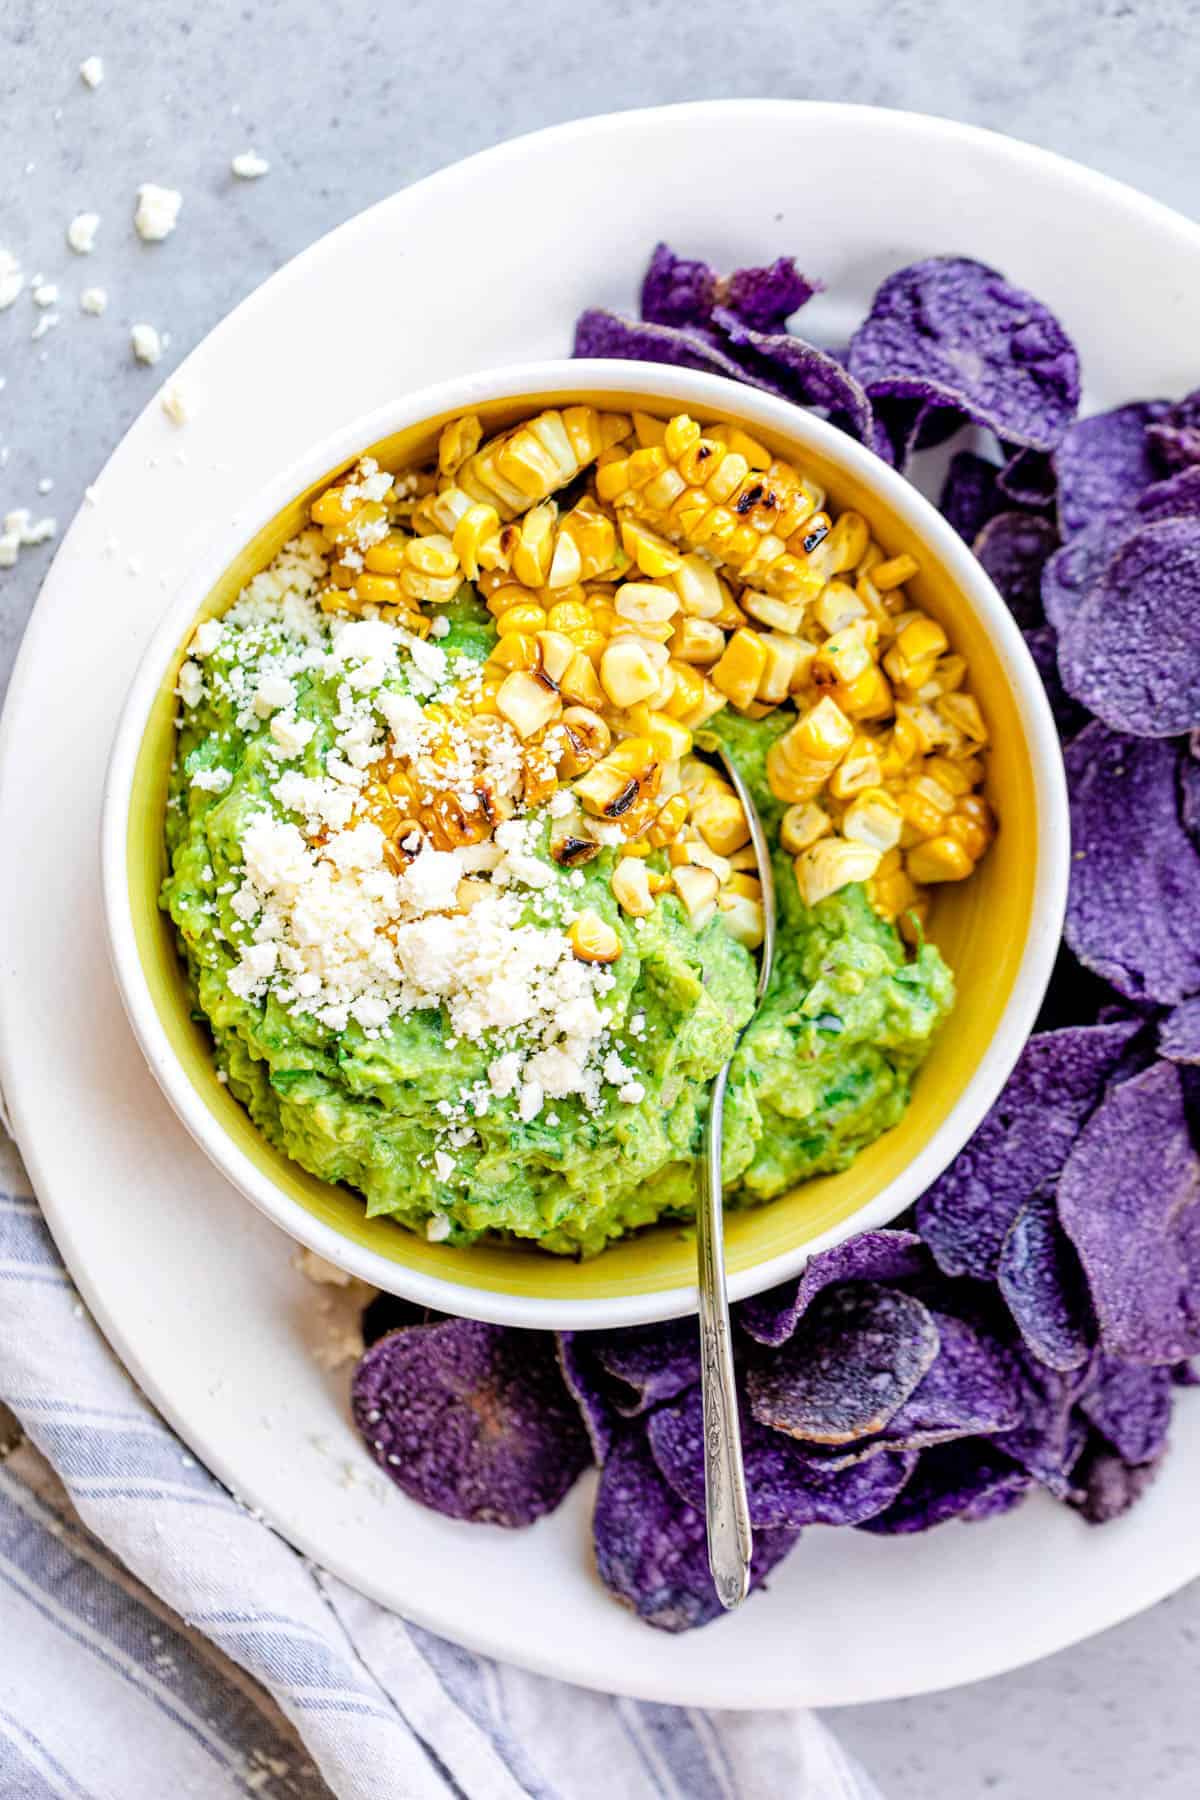 Bowl of the finished product - simple guacamole with grilled corn, cojita cheese. Around the bowl of guacamole is a round plate with purple potato chips